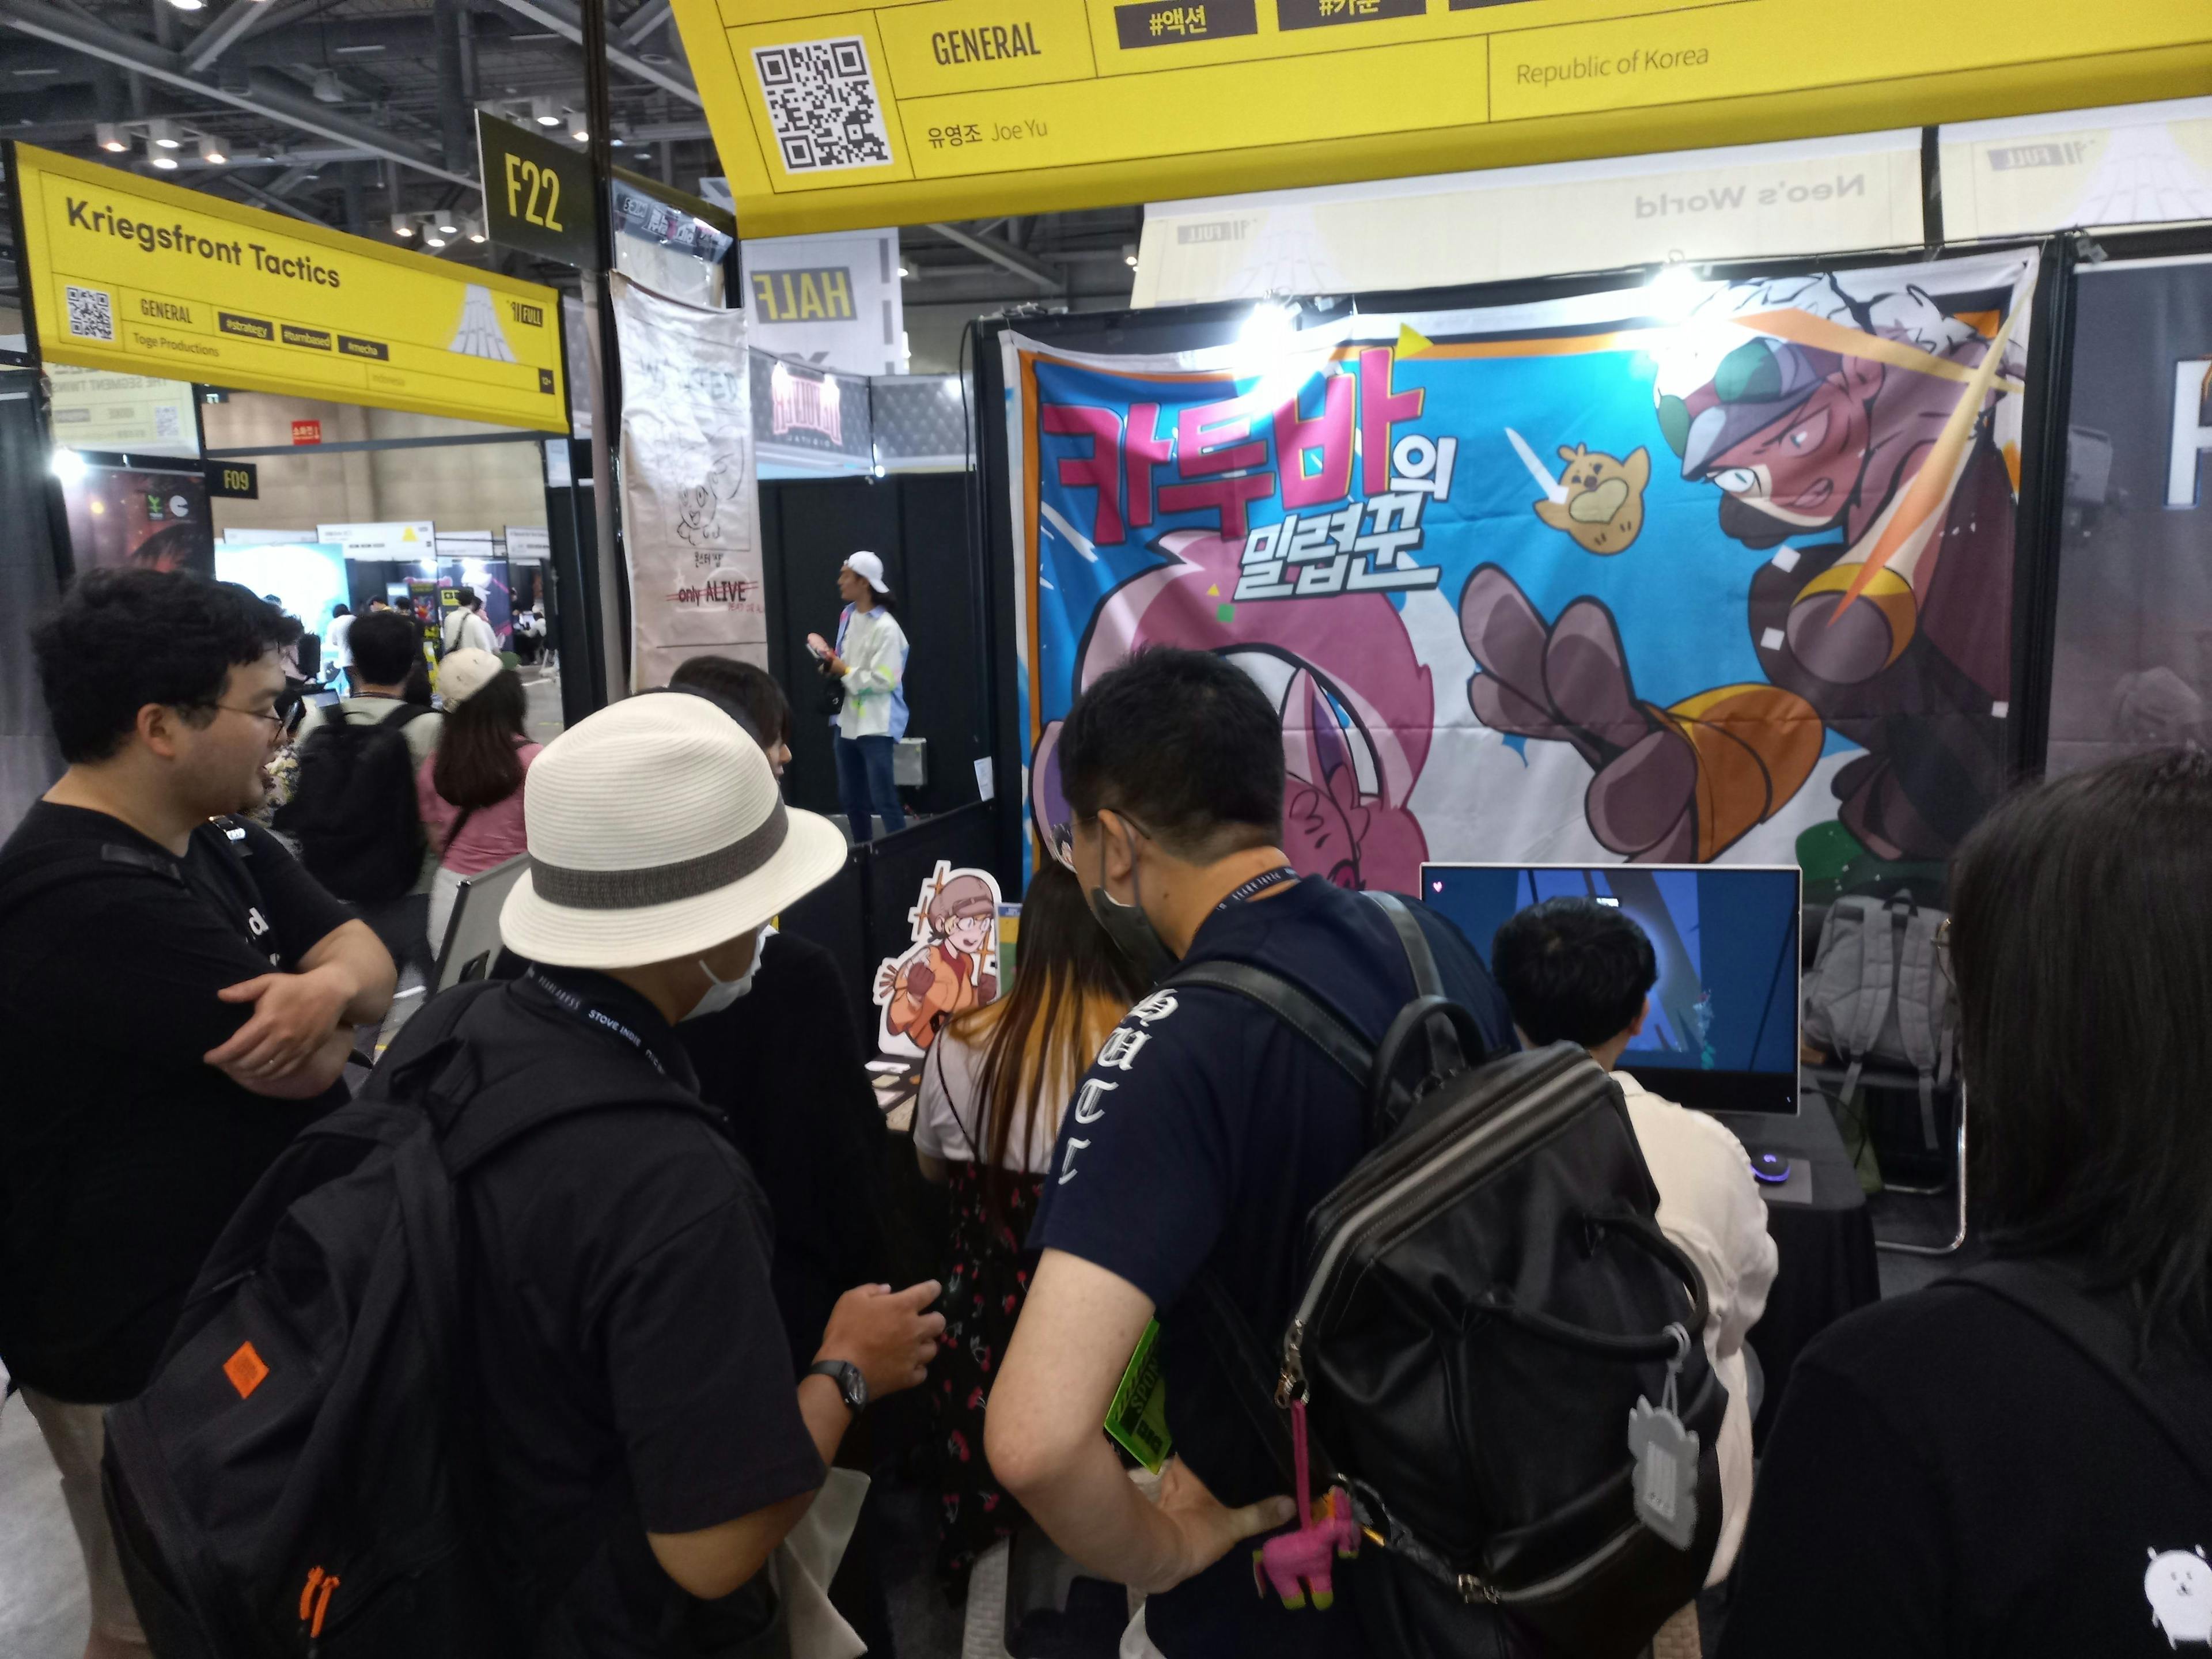 A lot of people excited to play Katuba's Poacher at BIC - Busan Indie Connect.